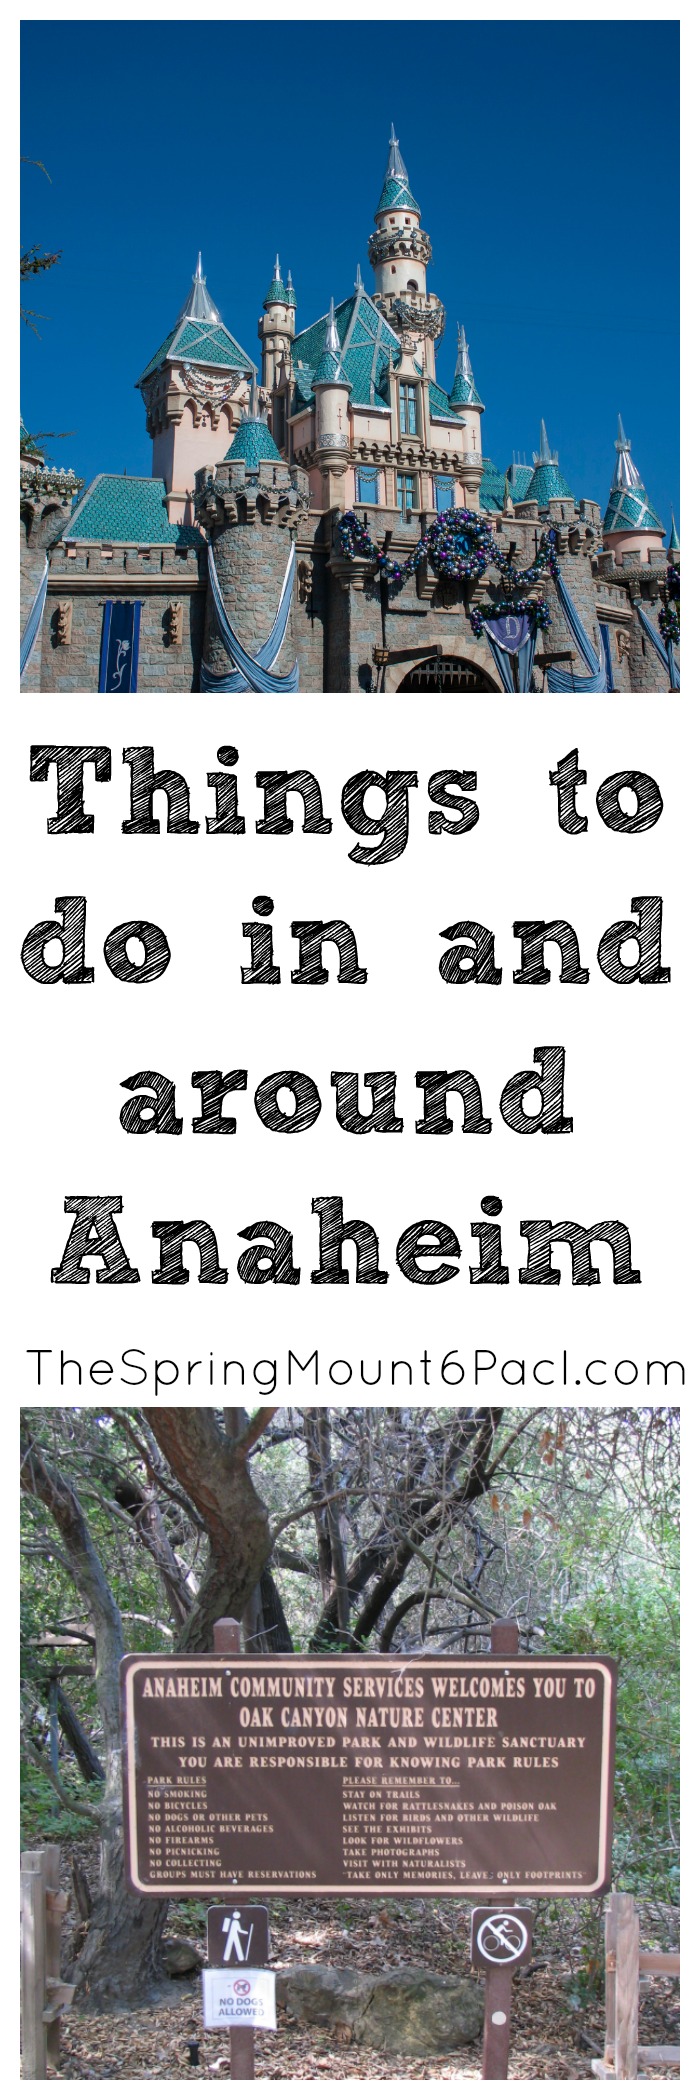 Heading to Anaheim? There are other things do than Disneyland. Here are some suggestions of things to do in and around Anaheim.